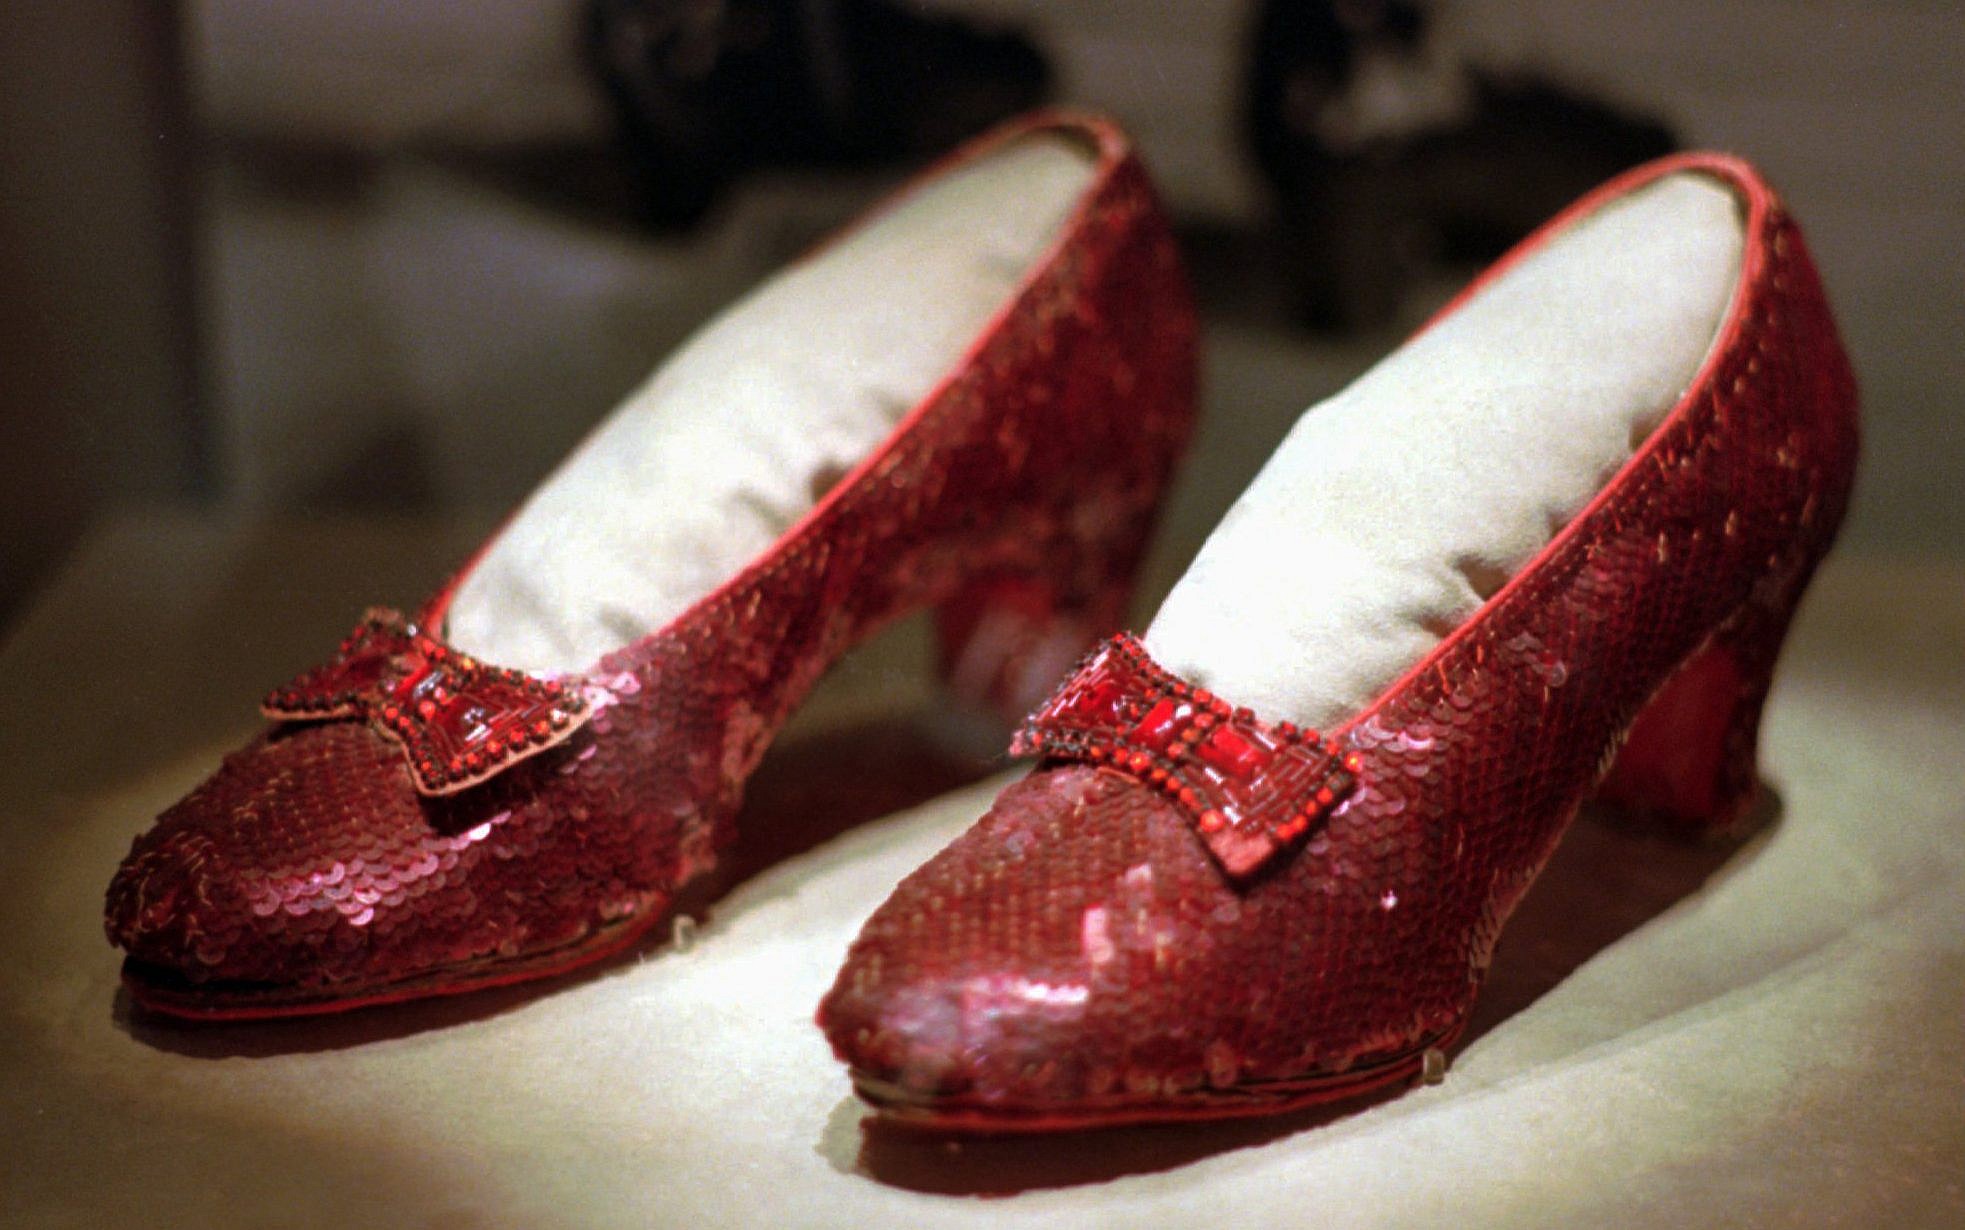 Discover more than 164 stolen ruby slippers latest